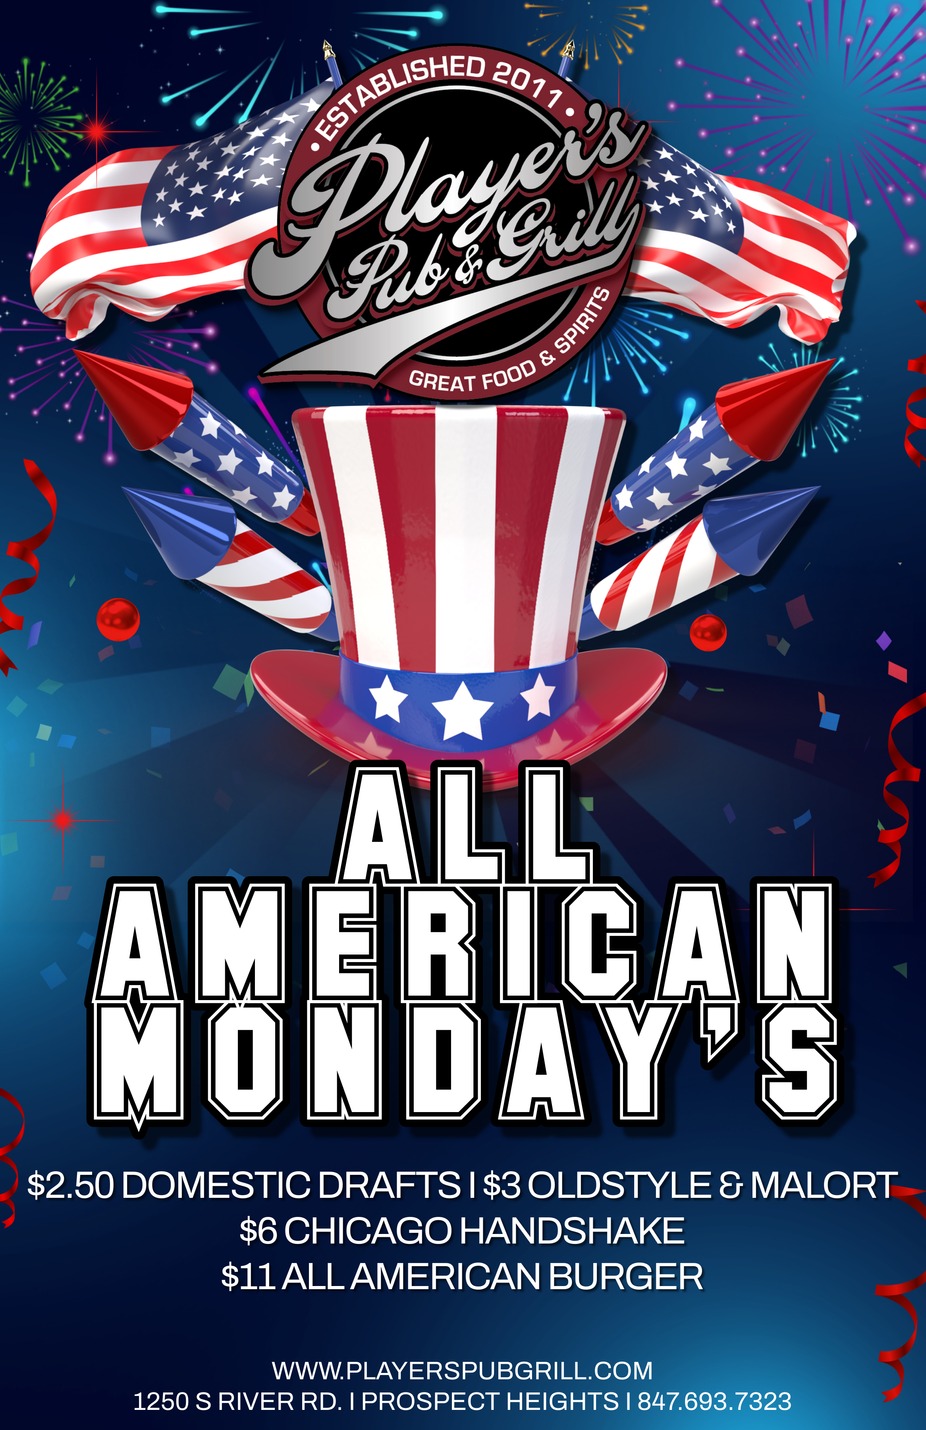 All American Monday's event photo